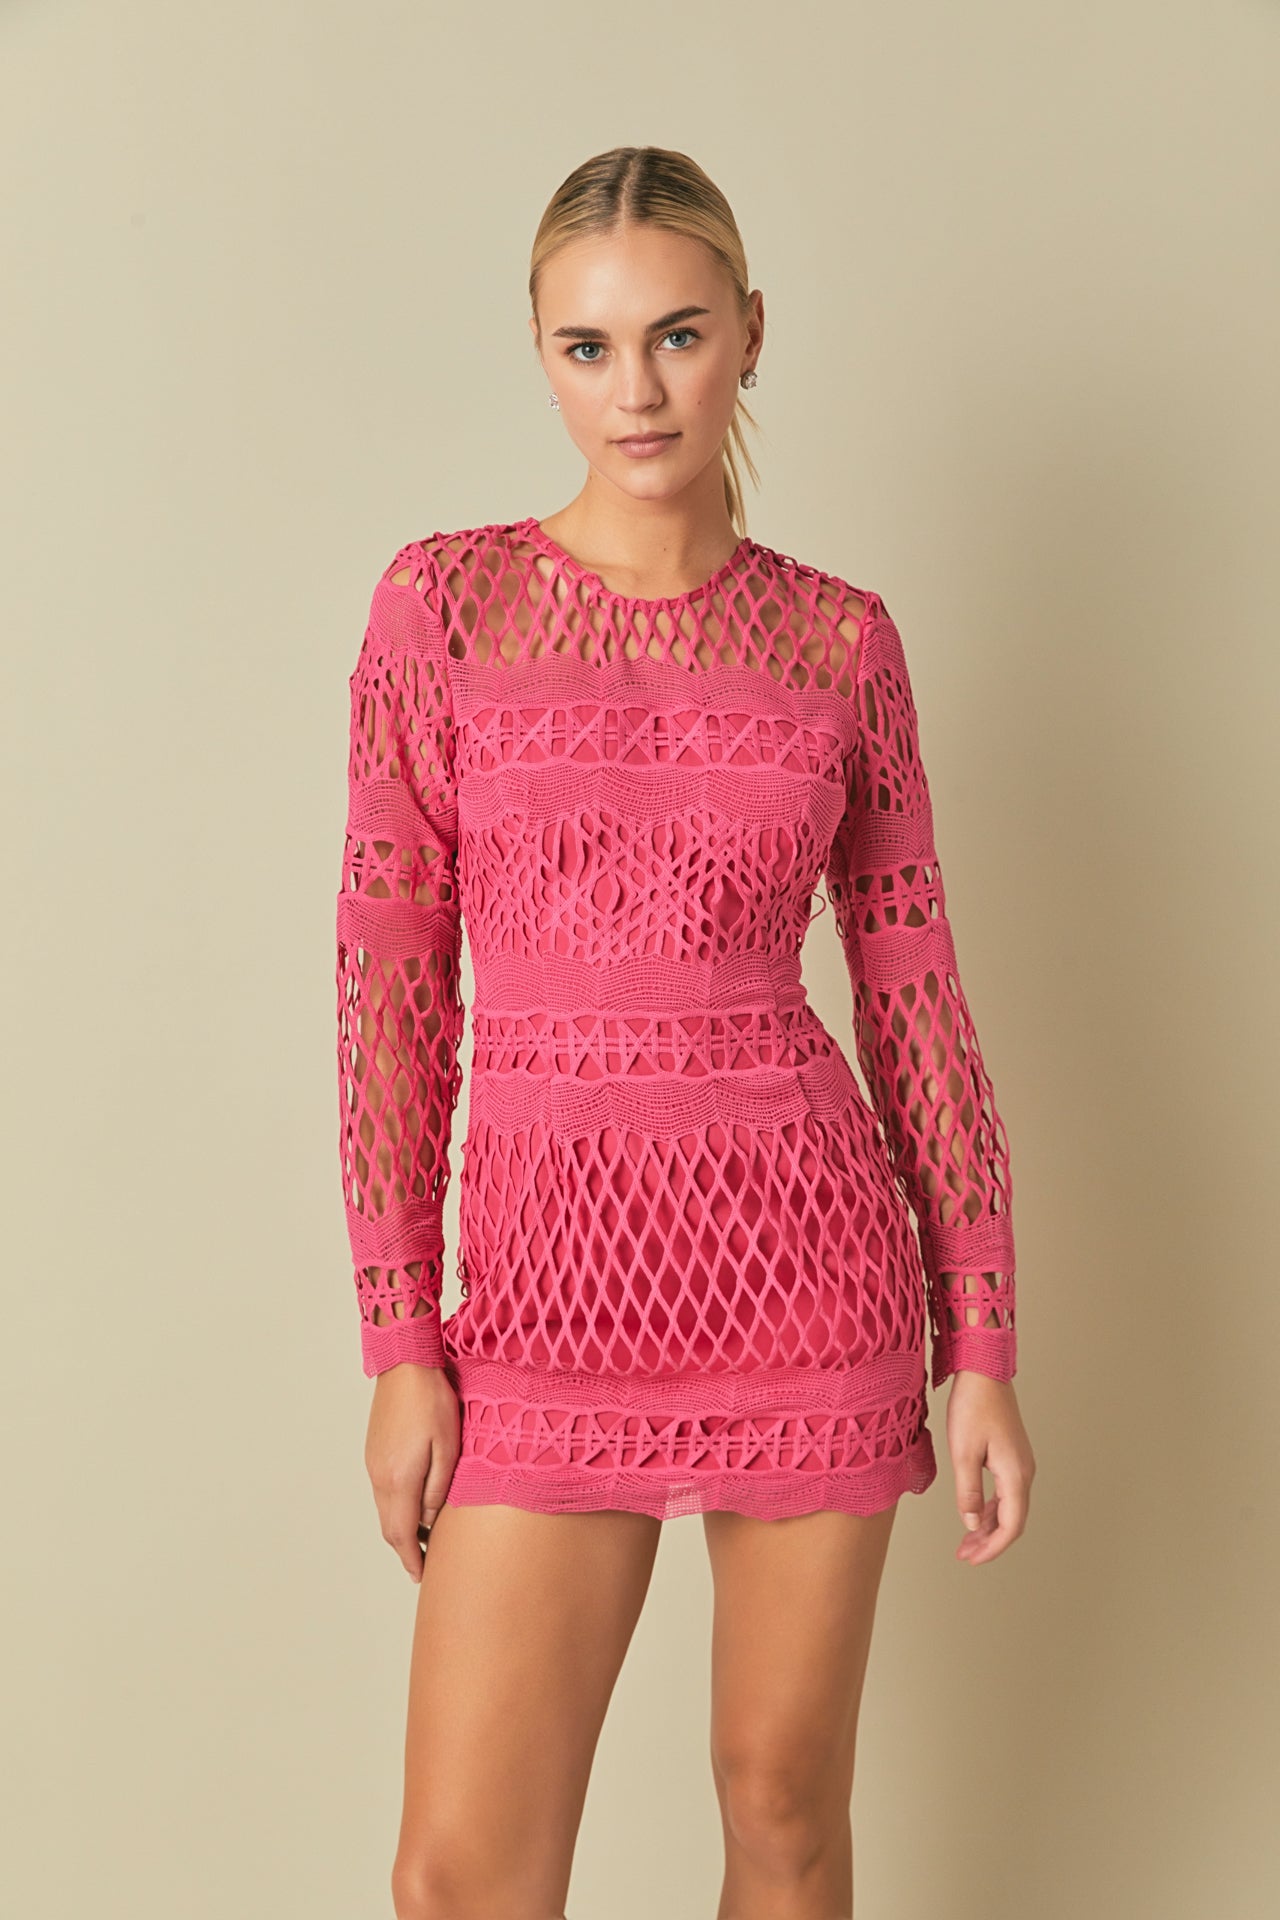 ENDLESS ROSE - Long Sleeve Crochet Mini Dress - DRESSES available at Objectrare